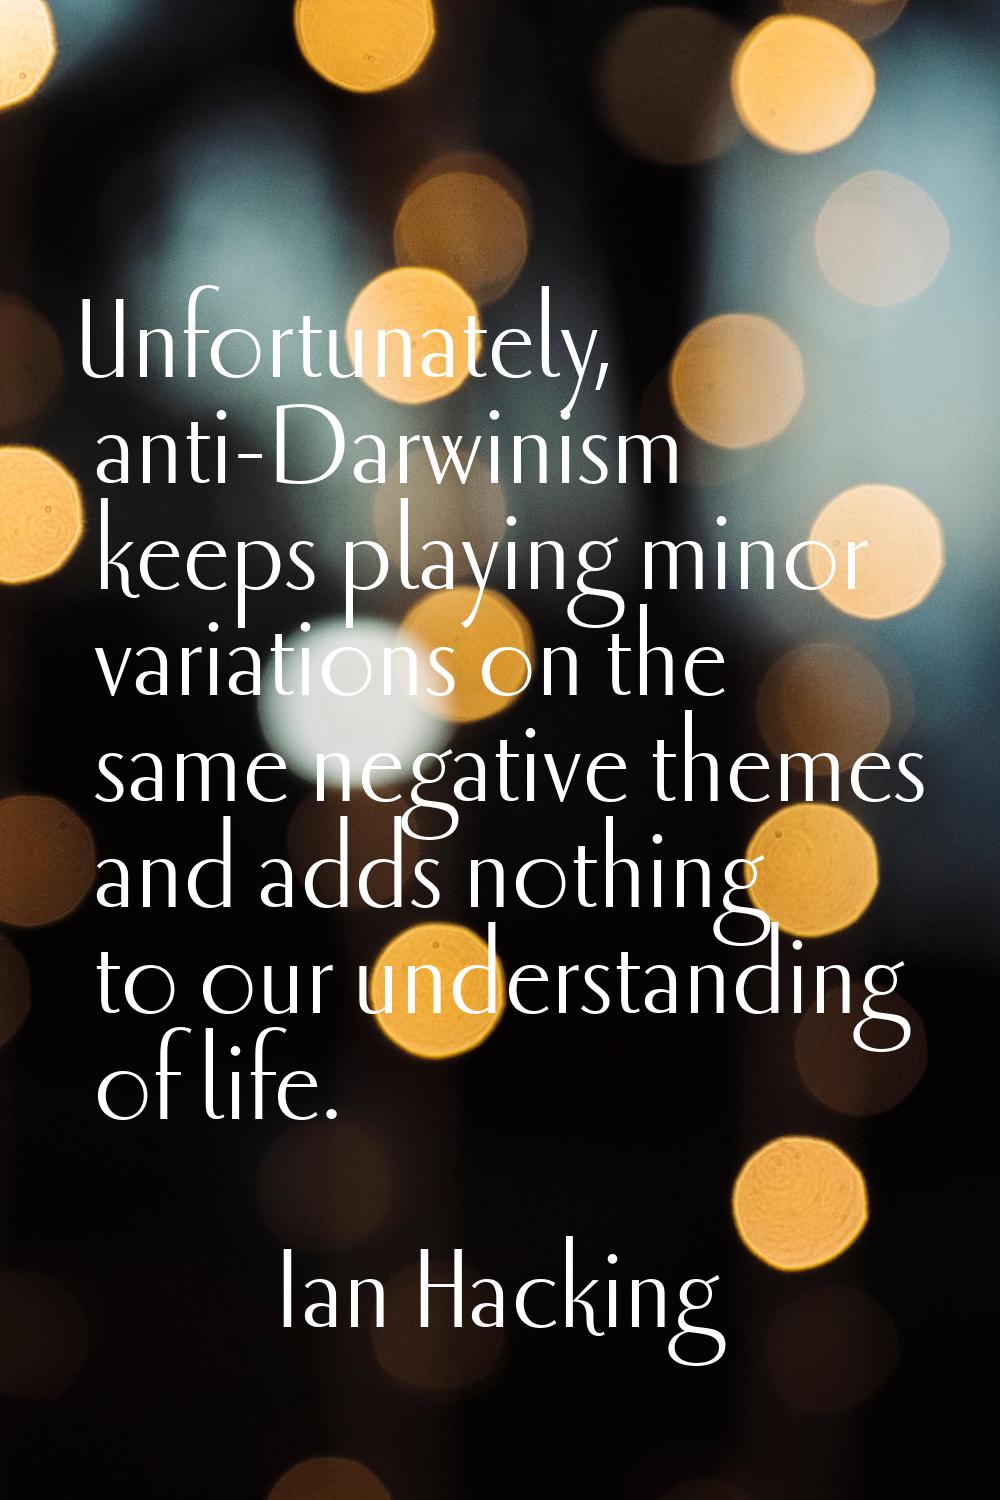 Unfortunately, anti-Darwinism keeps playing minor variations on the same negative themes and adds n